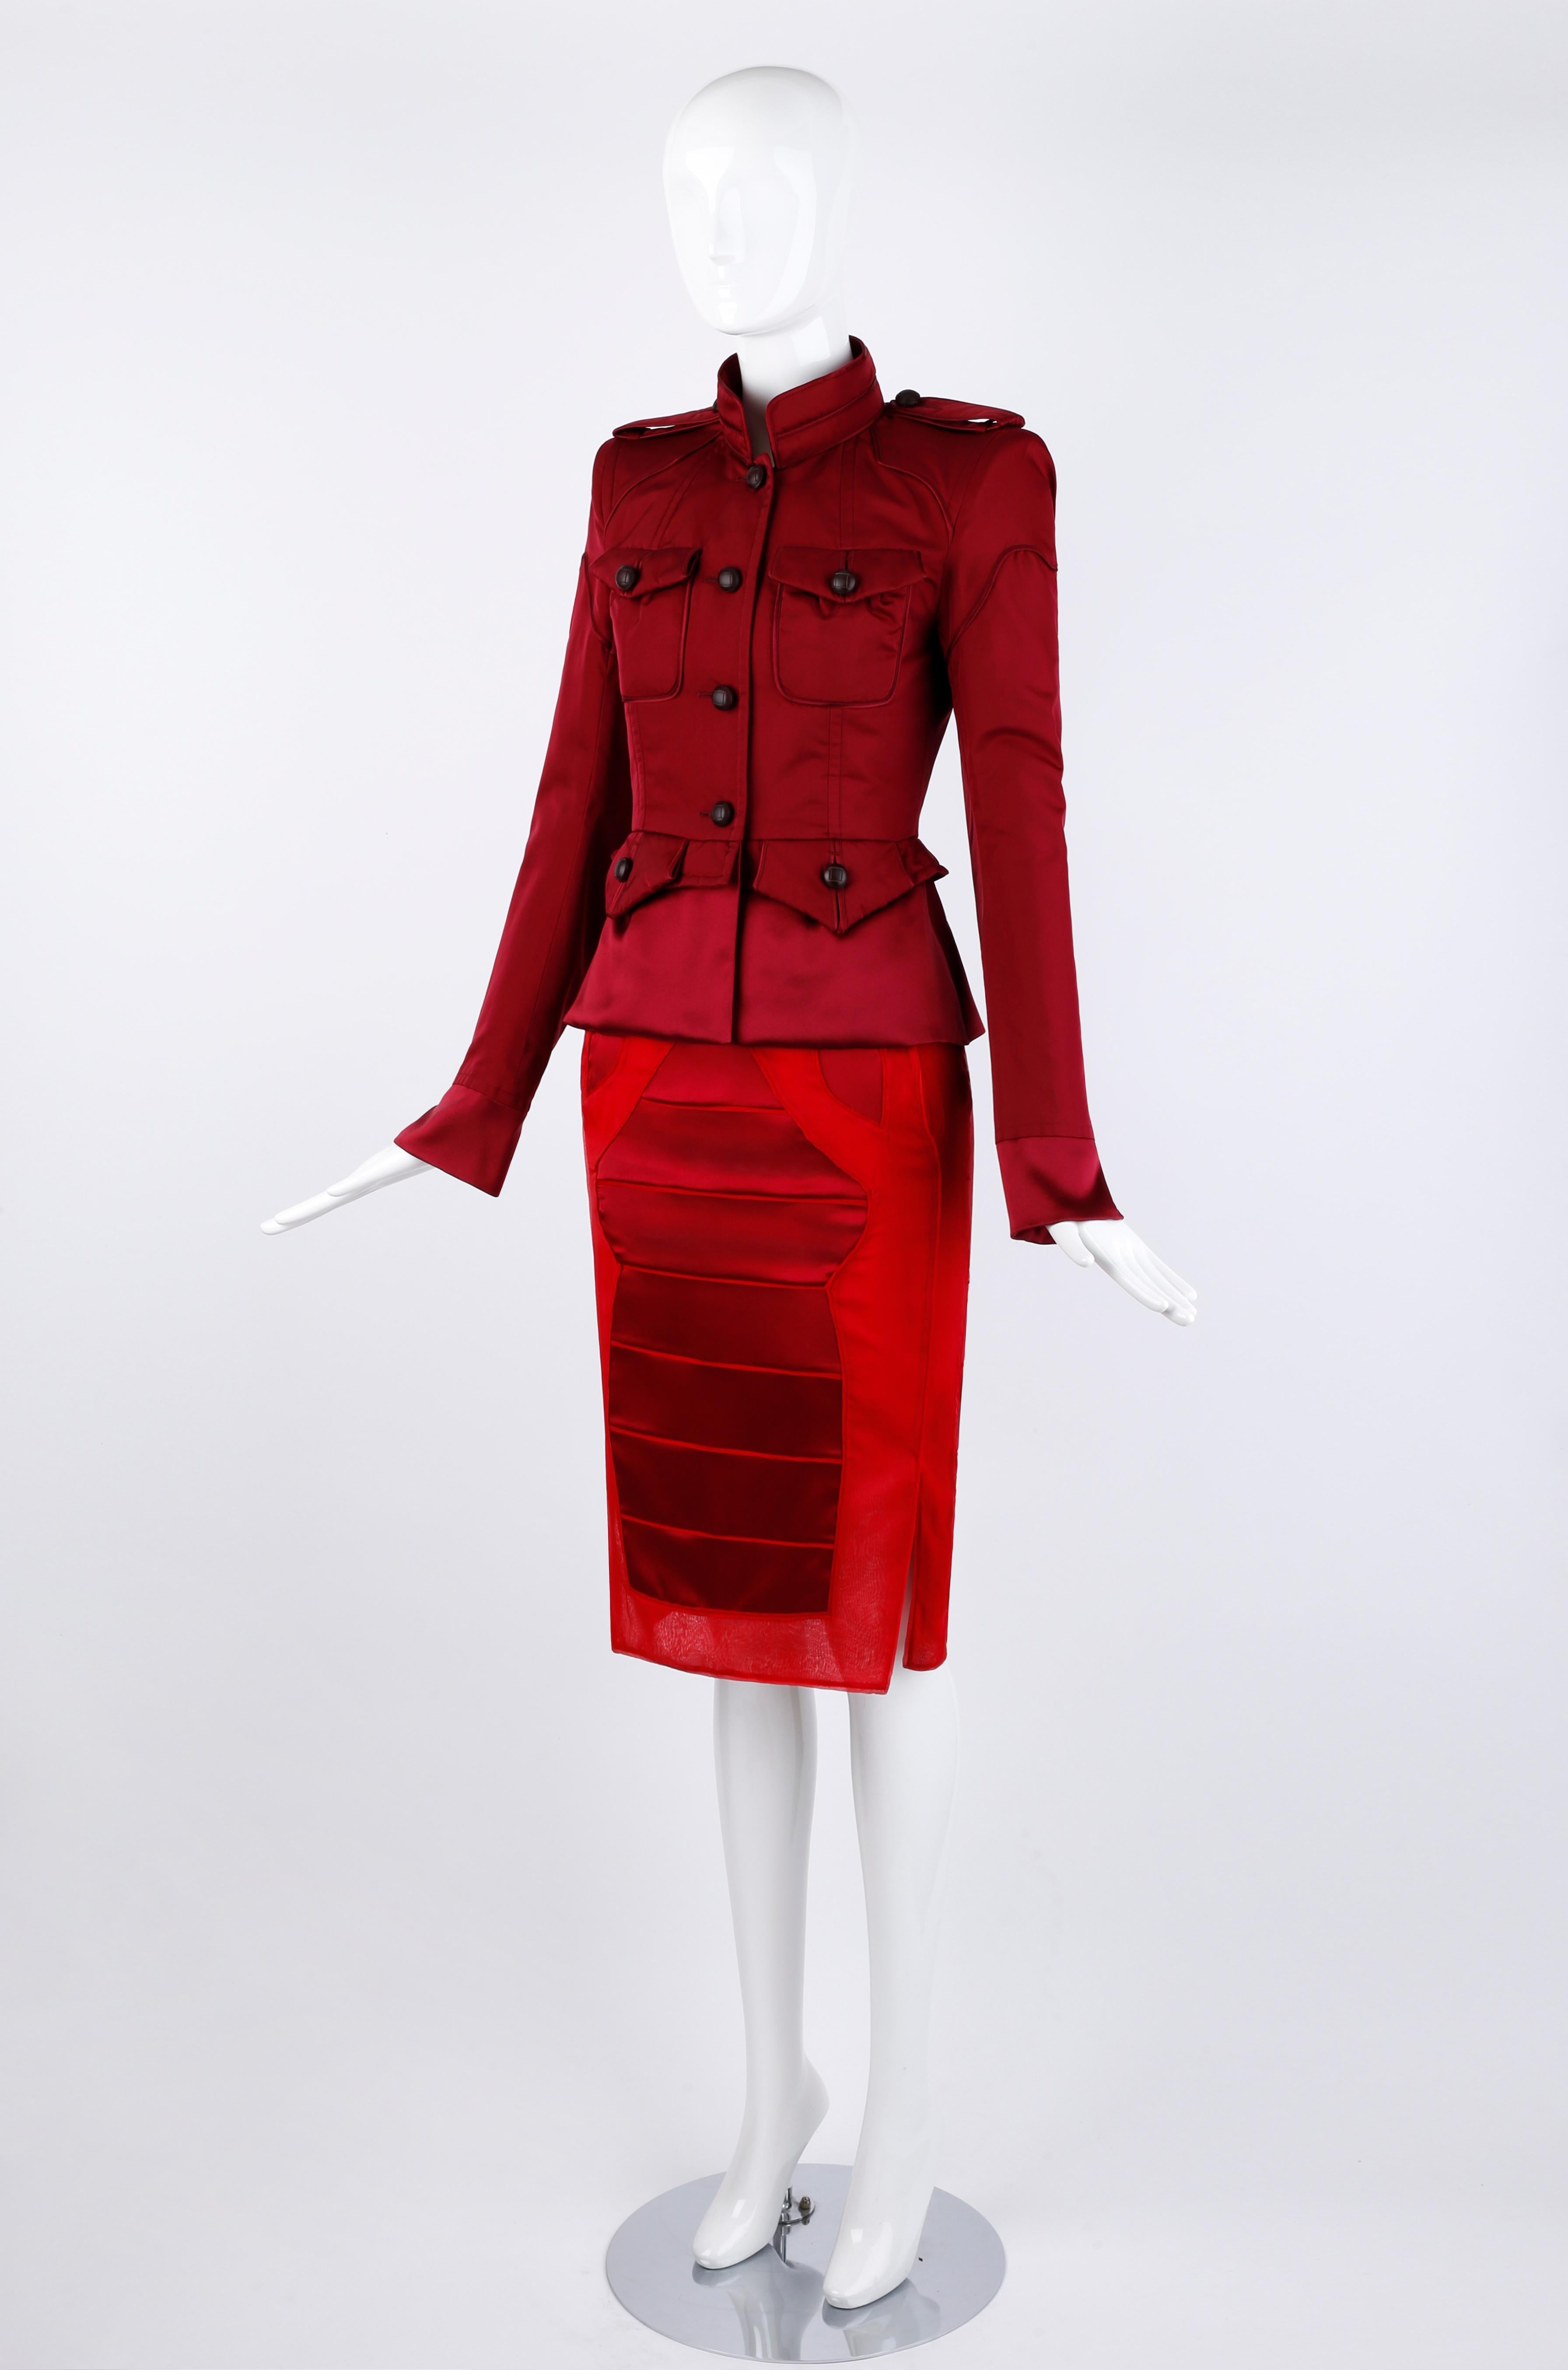 Designed by Tom Ford for the Yves Saint Laurent Fall/Winter 2004 collection; Look #1. This was Tom Ford's last collection with YSL. Both items comprised of 100% silk. Vibrant red high waisted skirt with front button and pleated details and semi